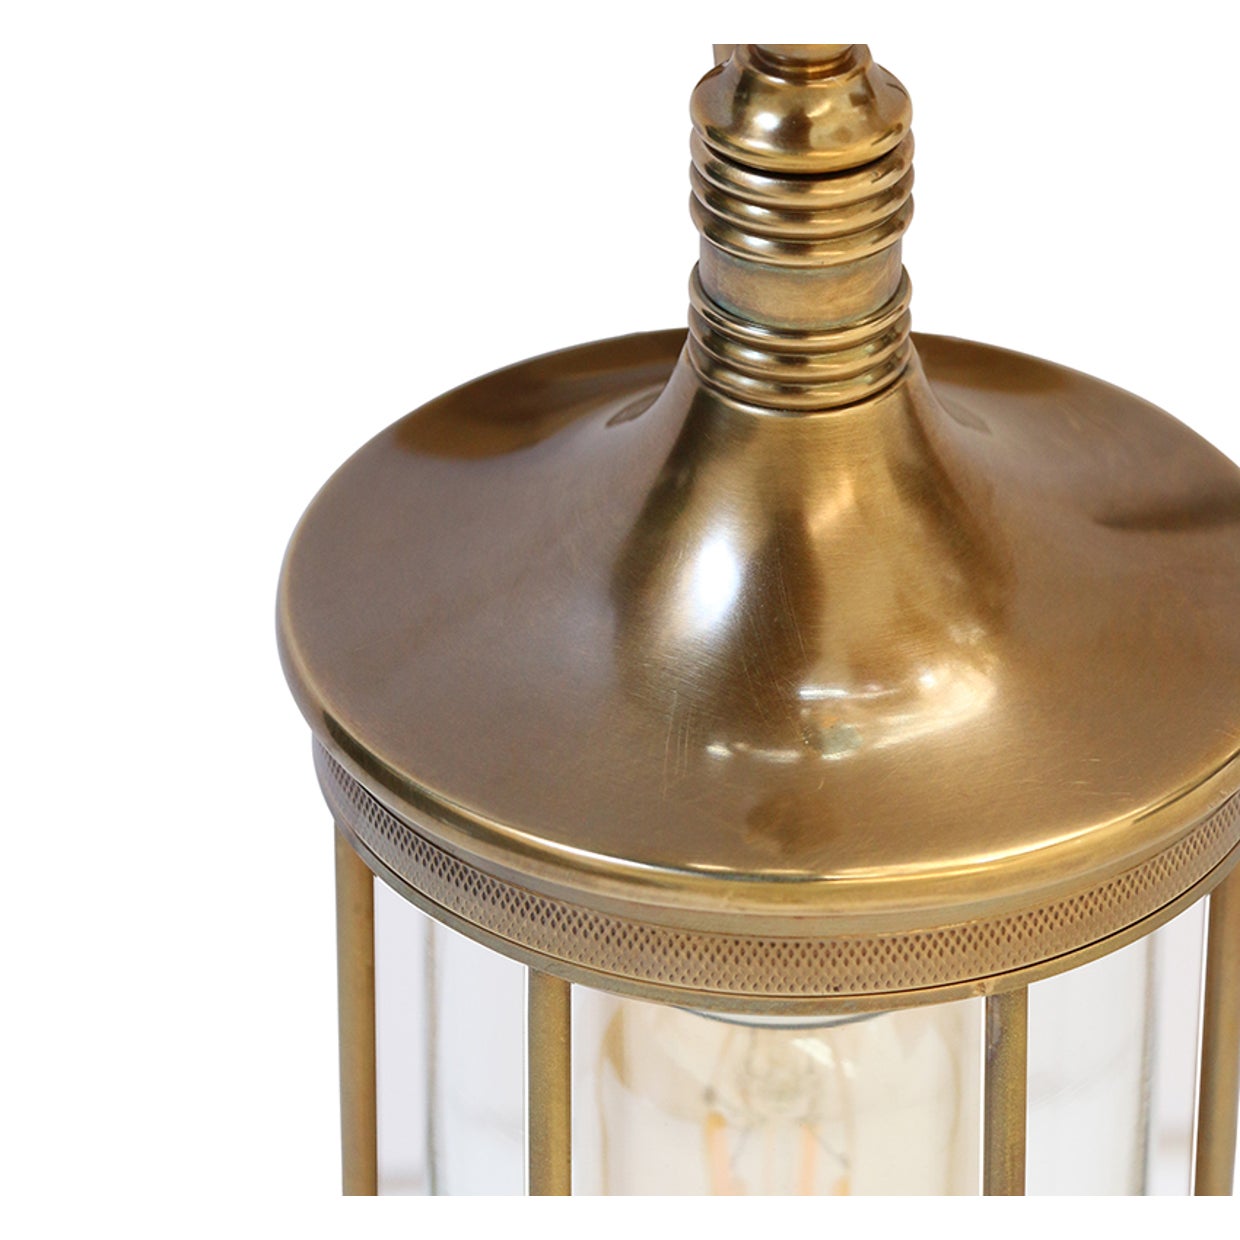 Outdoor IP54 Cage Wall Light in Antique Brass Finish